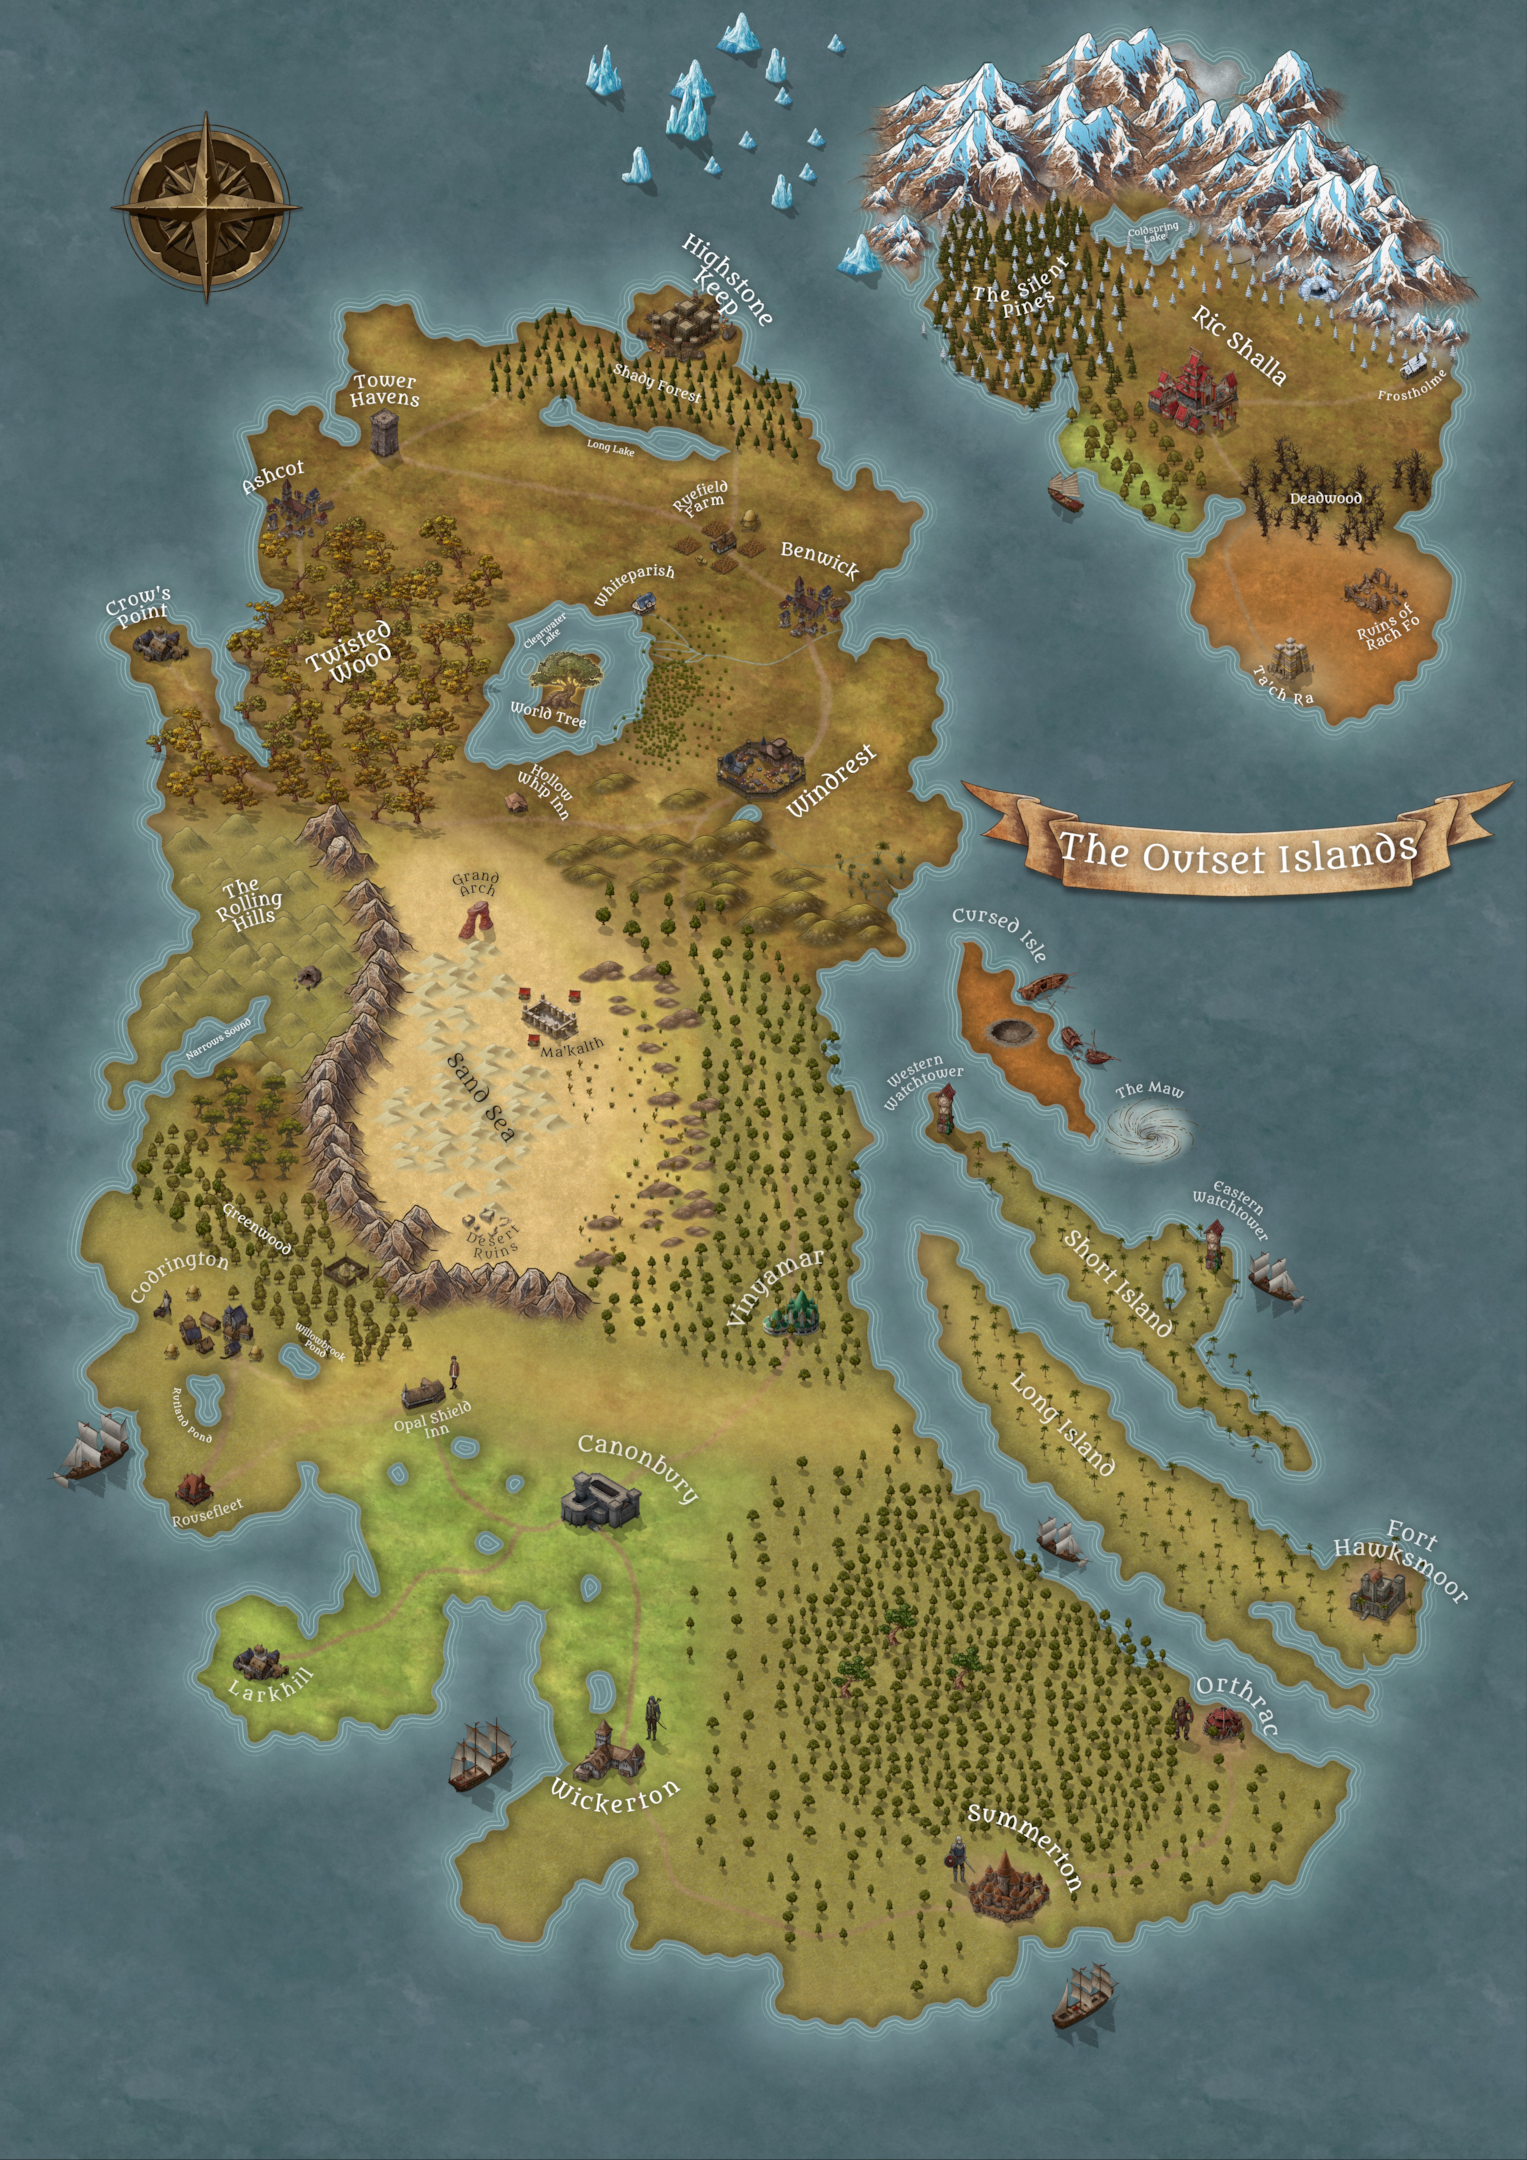 The Outset Isles.  The settings for the one-shots discussed in this series.  